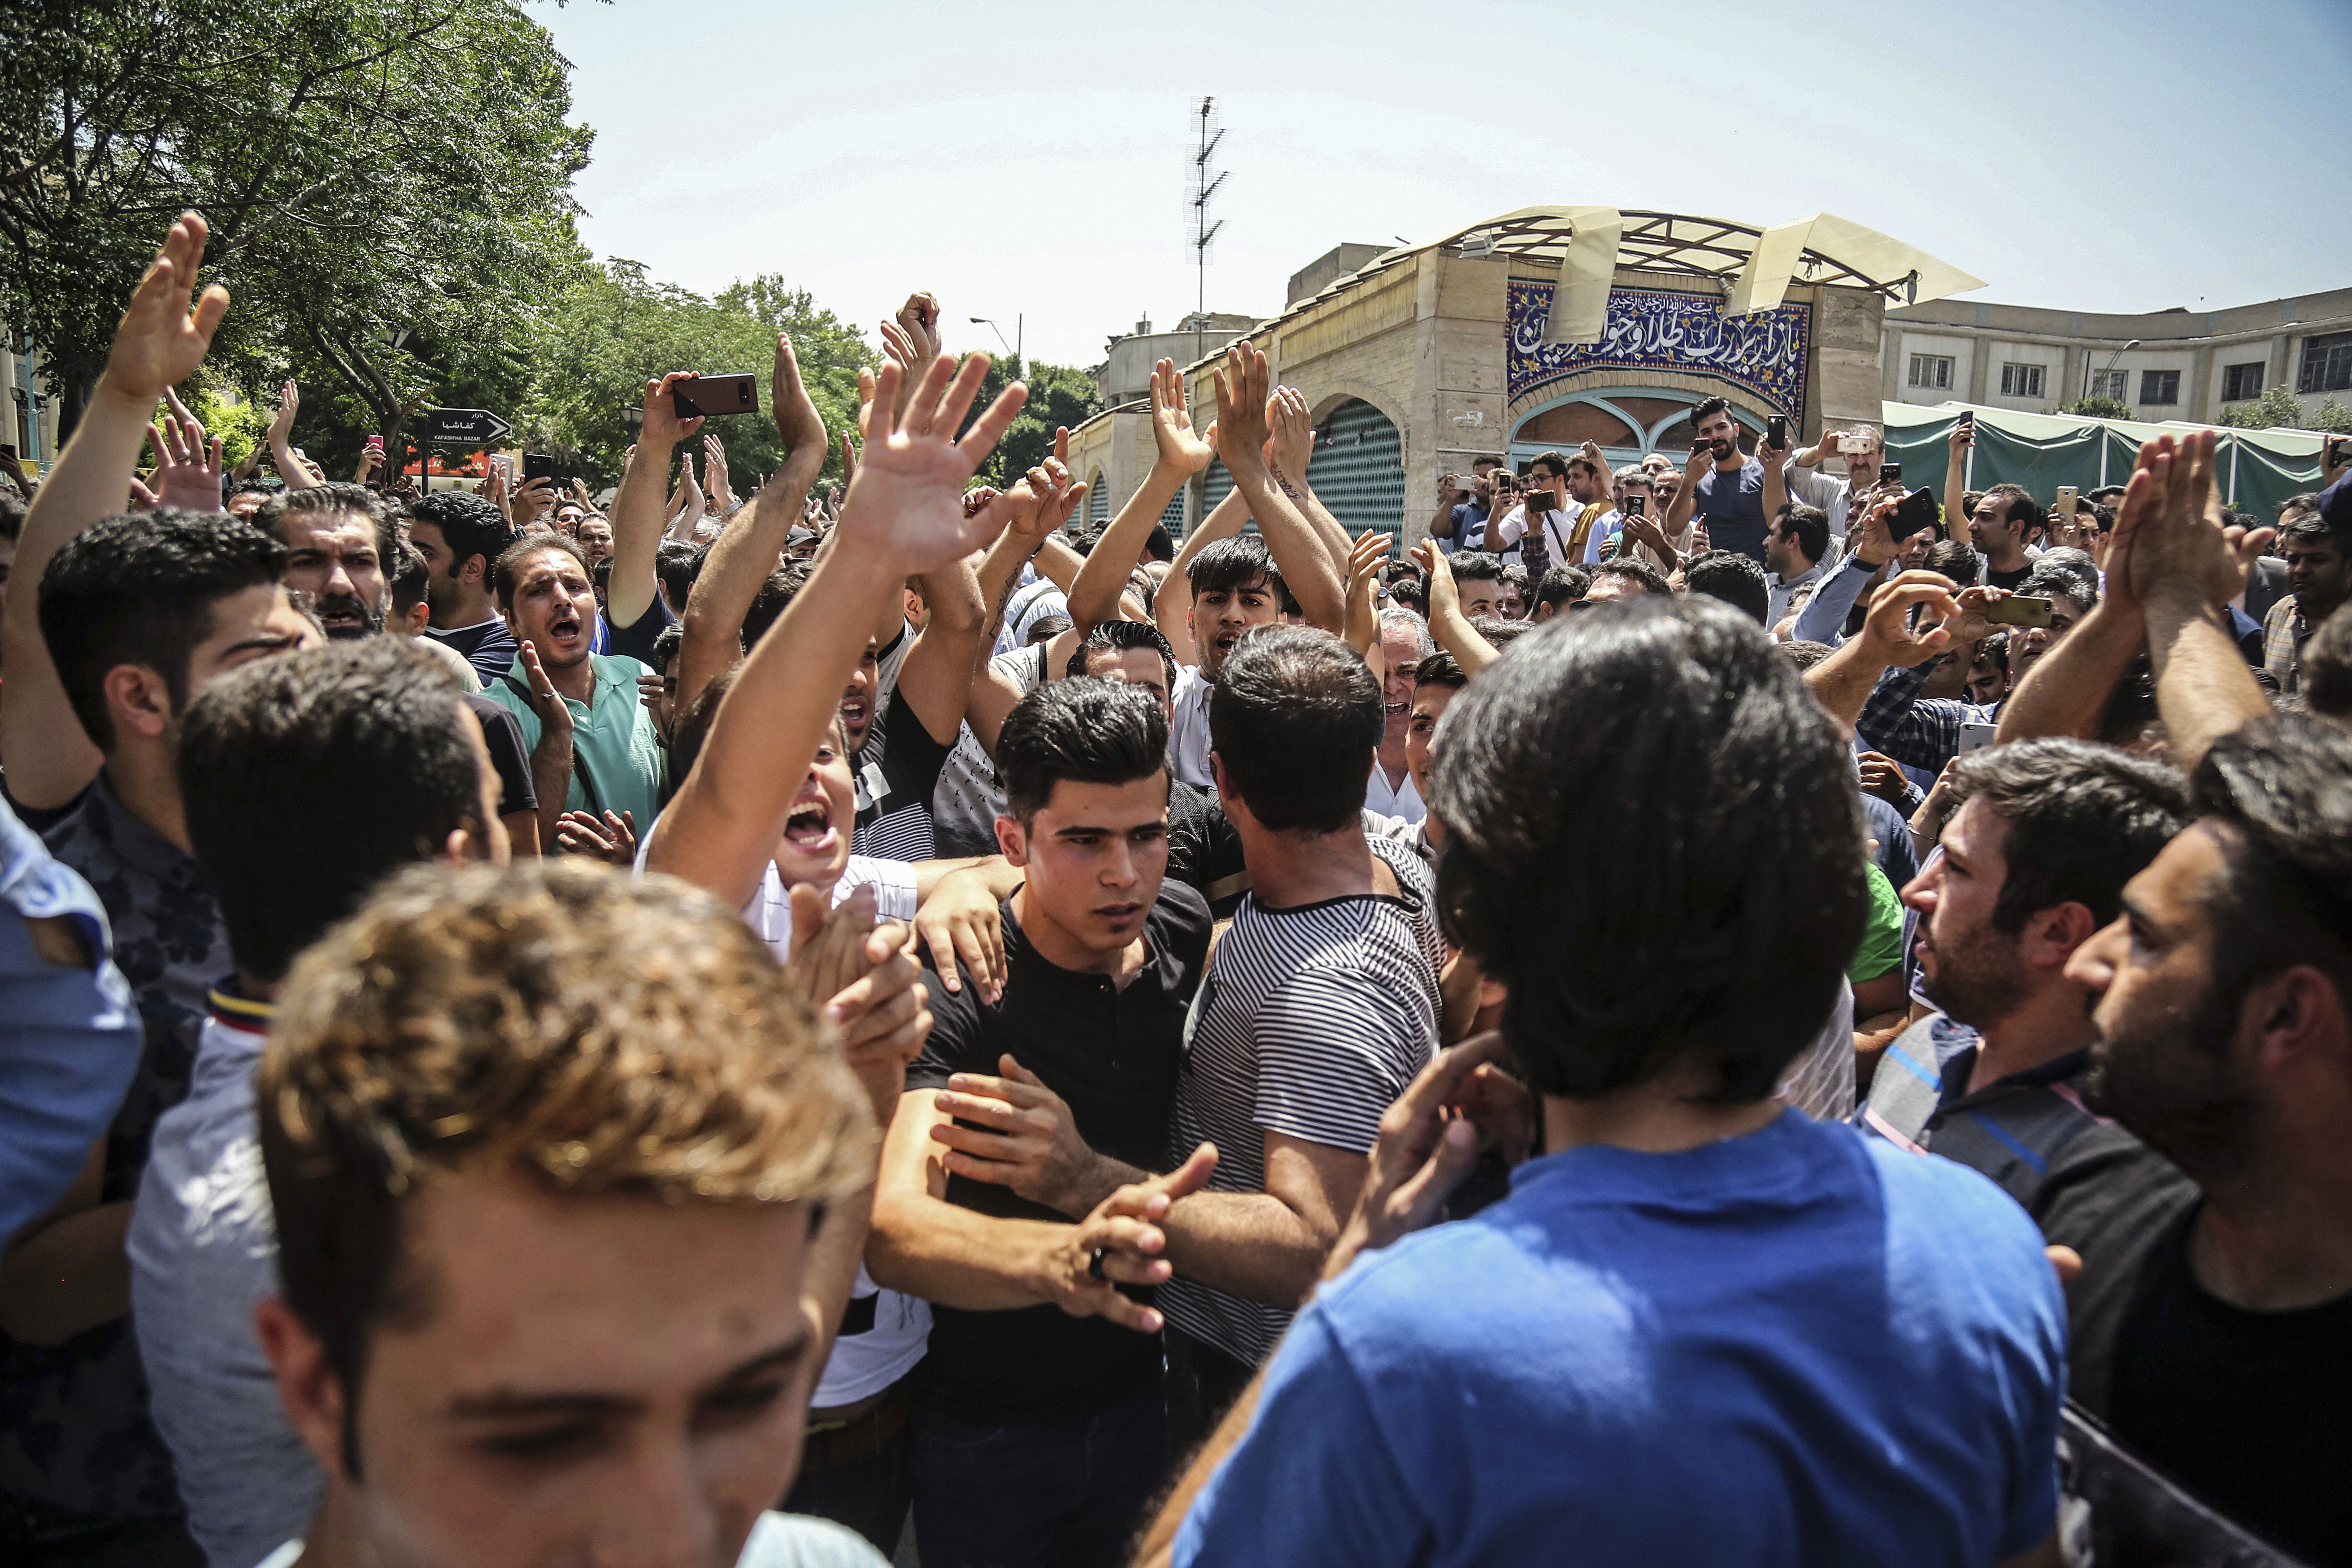 FILE - In this June 25, 2018 file photo, a group of protesters chant slogans at the main gate of the Old Grand Bazaar, in Tehran, Iran. On Saturday, Sept. 5, 2020, Iran broadcast the televised confession of a wrestler facing the death penalty after a tweet from President Donald Trump criticizing the case, a segment that resembled hundreds of other suspected coerced confessions aired over the last decade in the Islamic Republic. The case of 27-year-old Navid Afkari has drawn the attention of a social media campaign that portrays him and his brothers as victims targeted over participating in protests against Iran's Shiite theocracy in 2018. Photo: AP